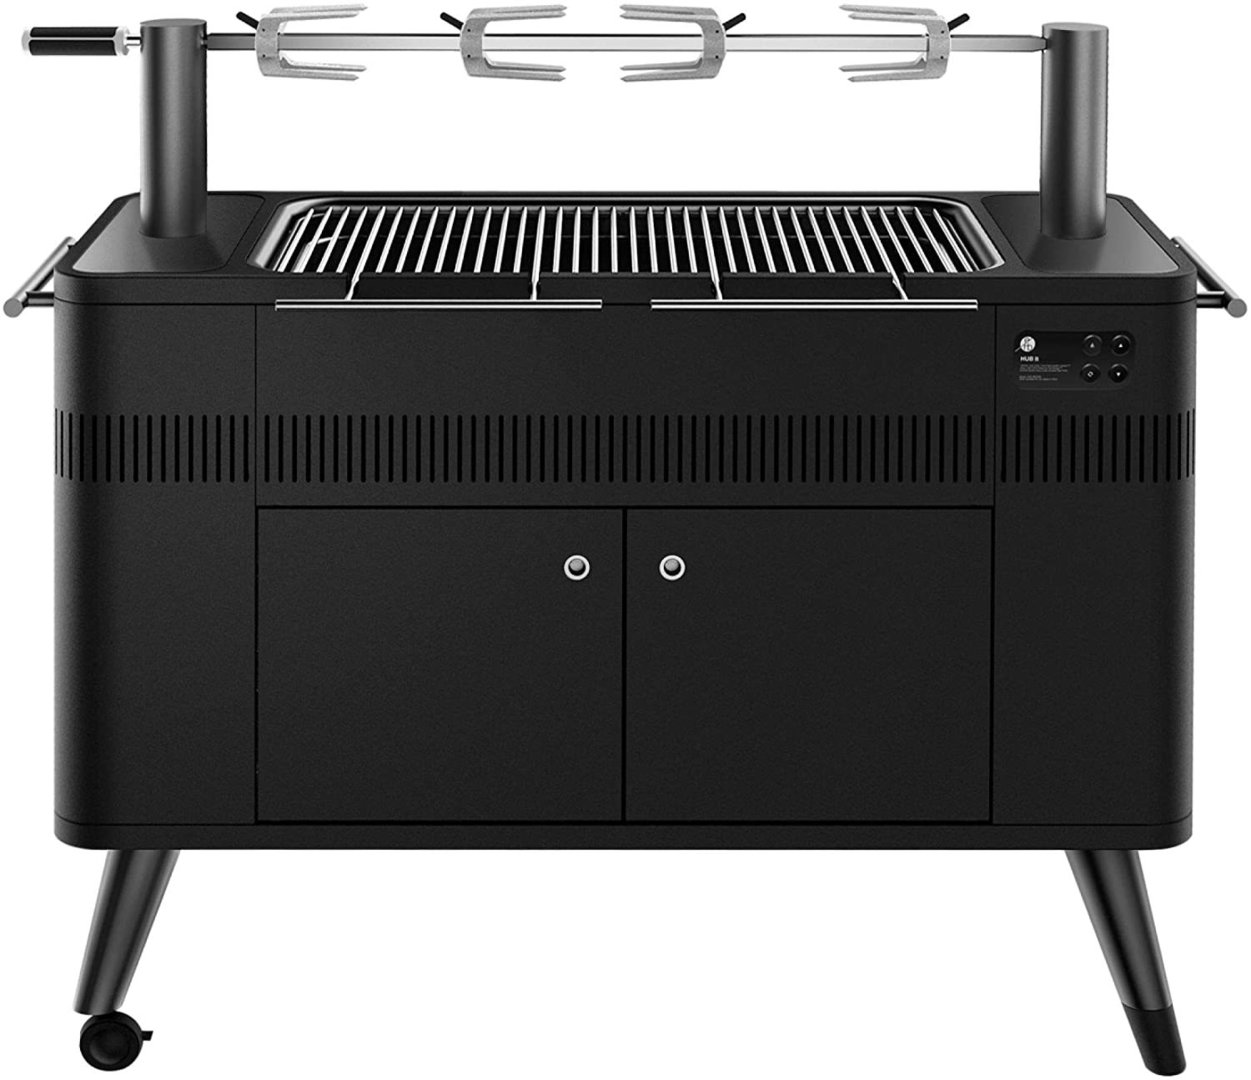 Hub II Everdure Charcoal Barbecue with Rotisserie by Heston Blumenthal 